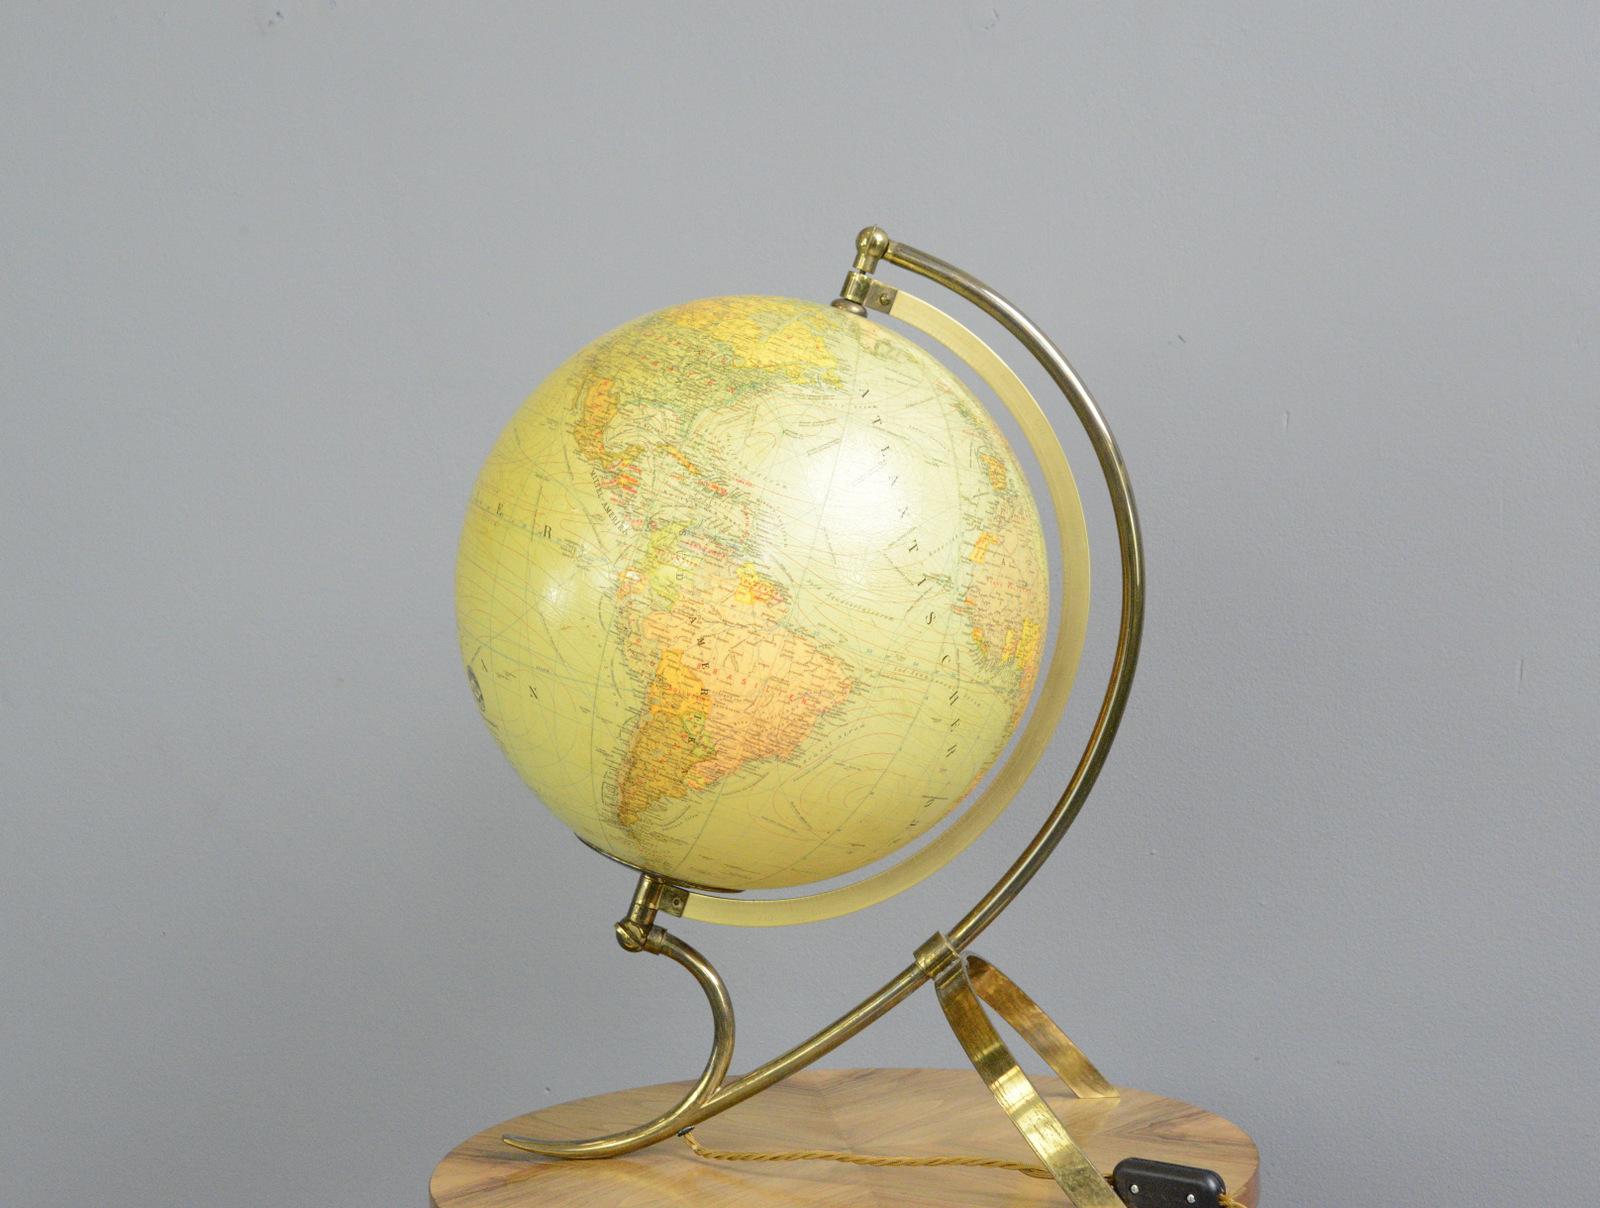 JRO globus light up desk globe, circa 1940s

- Glass globe
- Adjustable brass arm
- On/off switch on the cord
- Takes 1X E14 bulb
- German, late 1940s
- Measures: 50cm tall x 36cm deep x 30cm wide 

Condition report

Fully re wired with